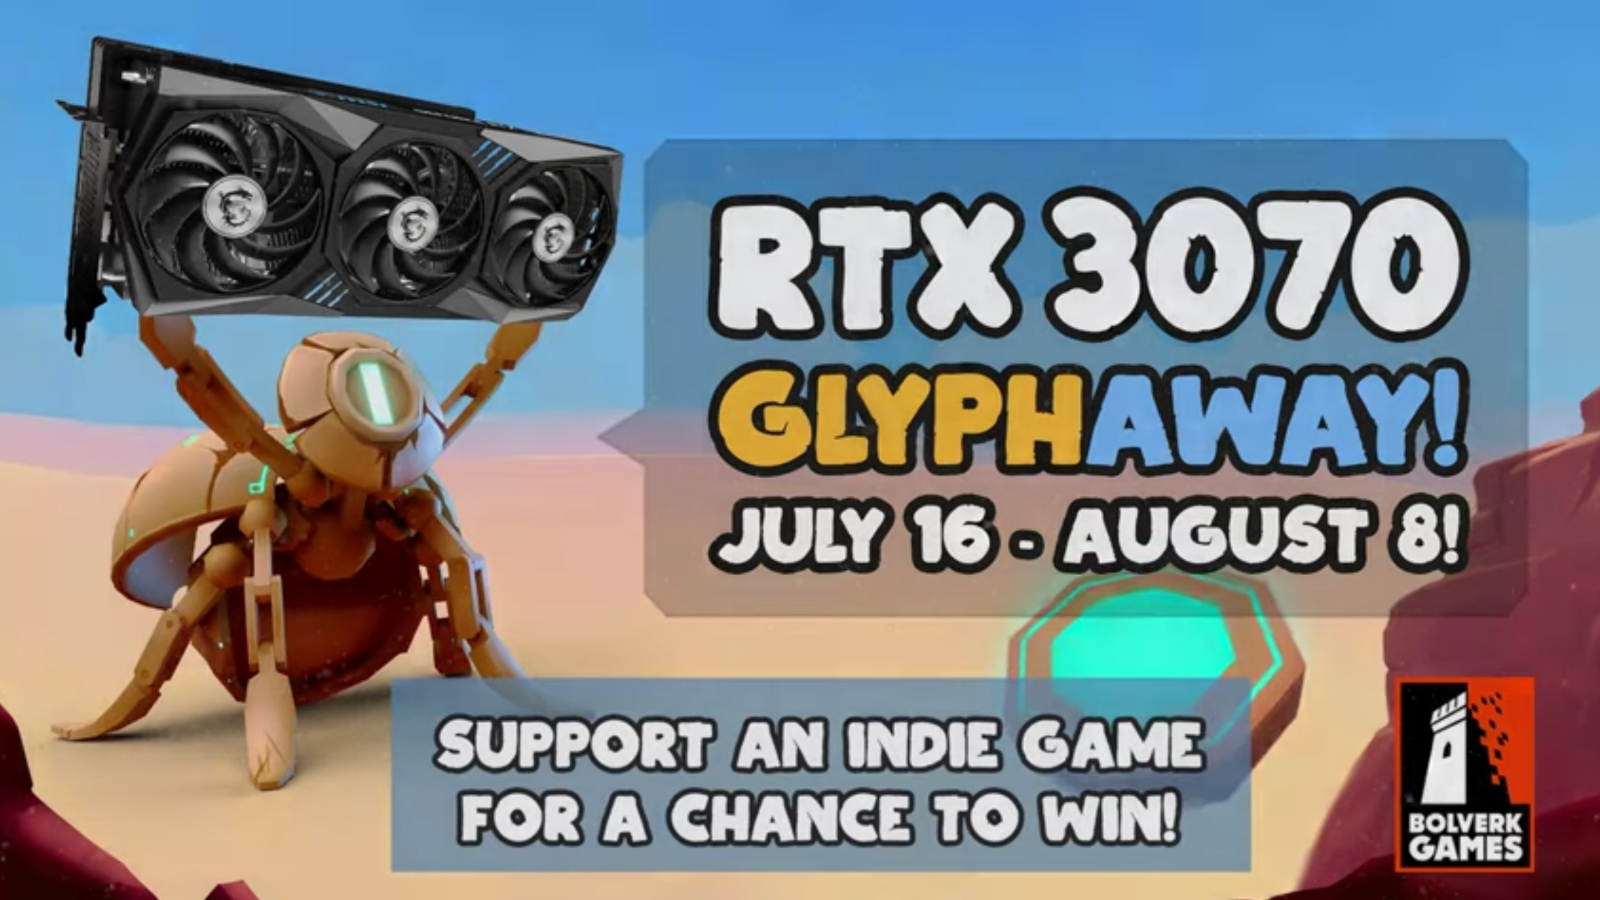 Win An Nvidia GeForce RTX 3070 Graphics Card With Glyph